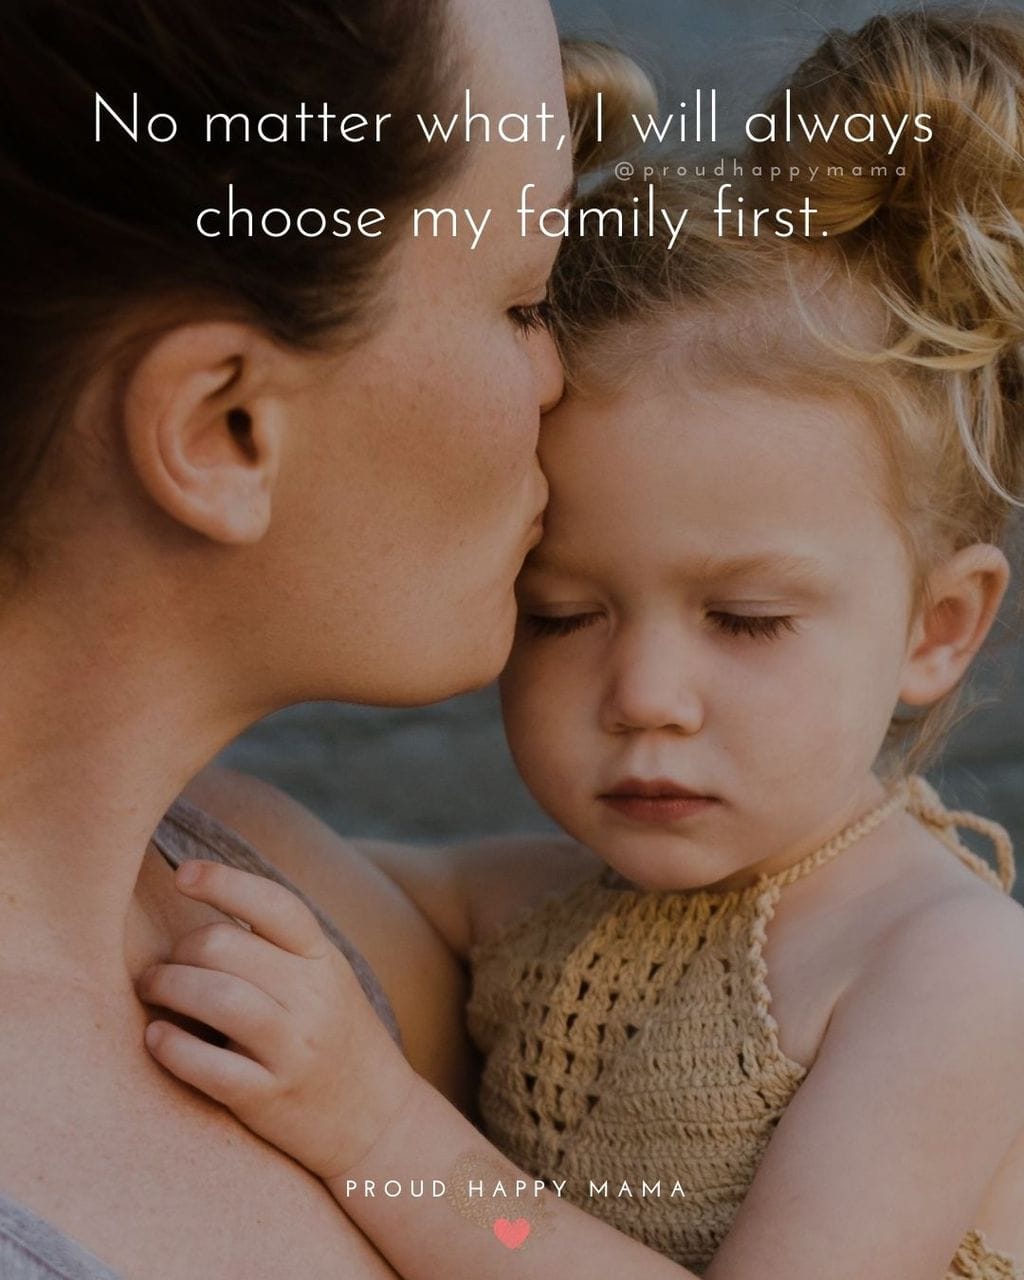 Quotes About Family Bonding | No matter what, I will always choose my family first.